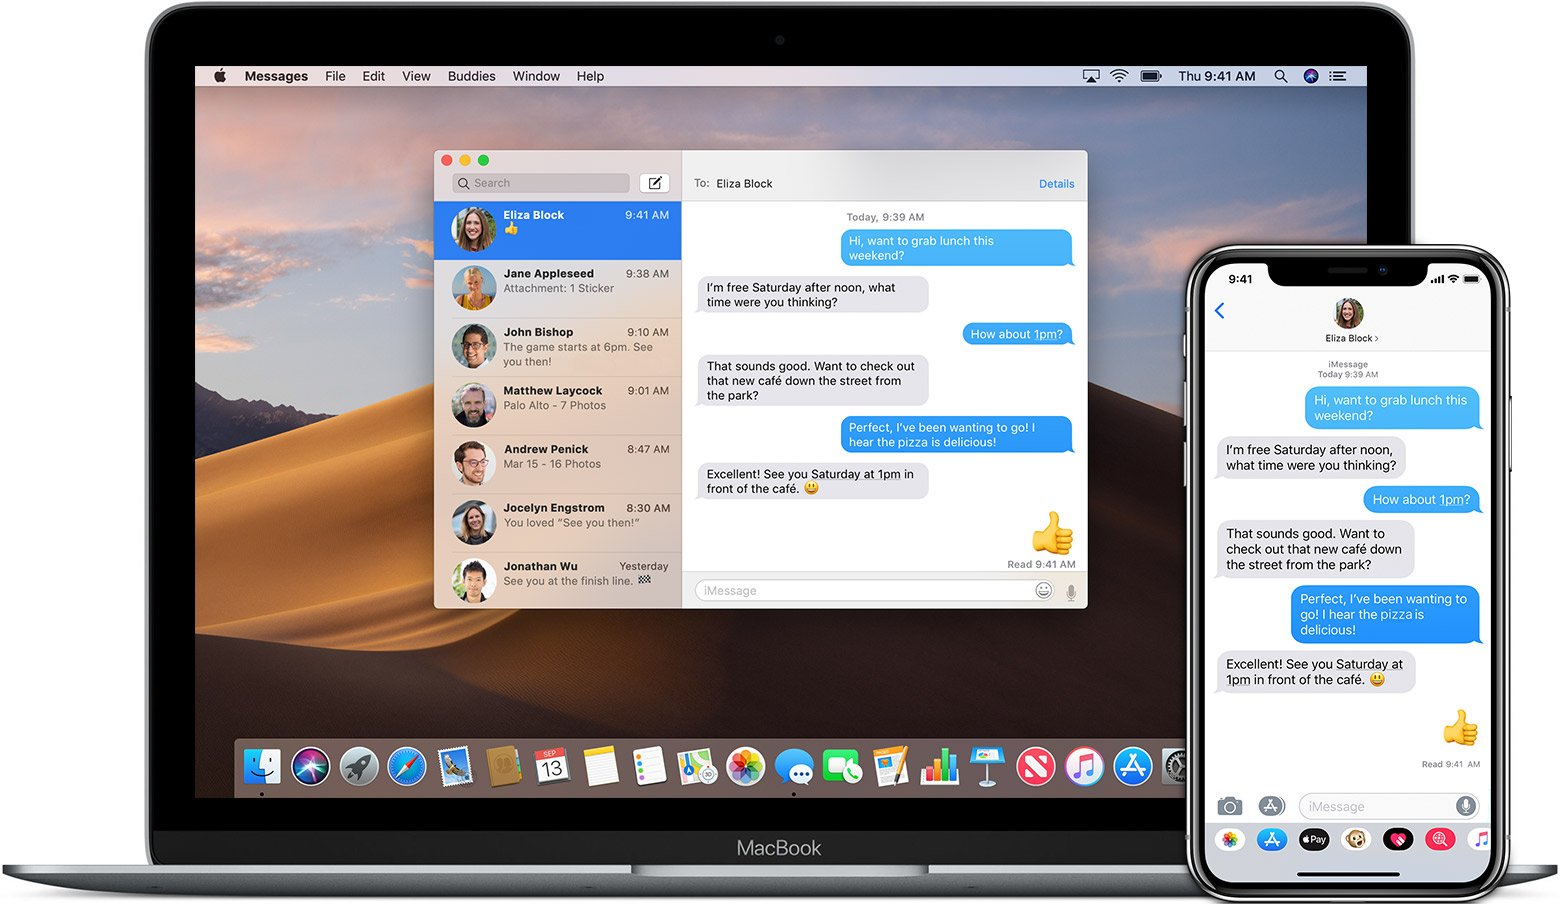 Download Messages From Iphone Mac